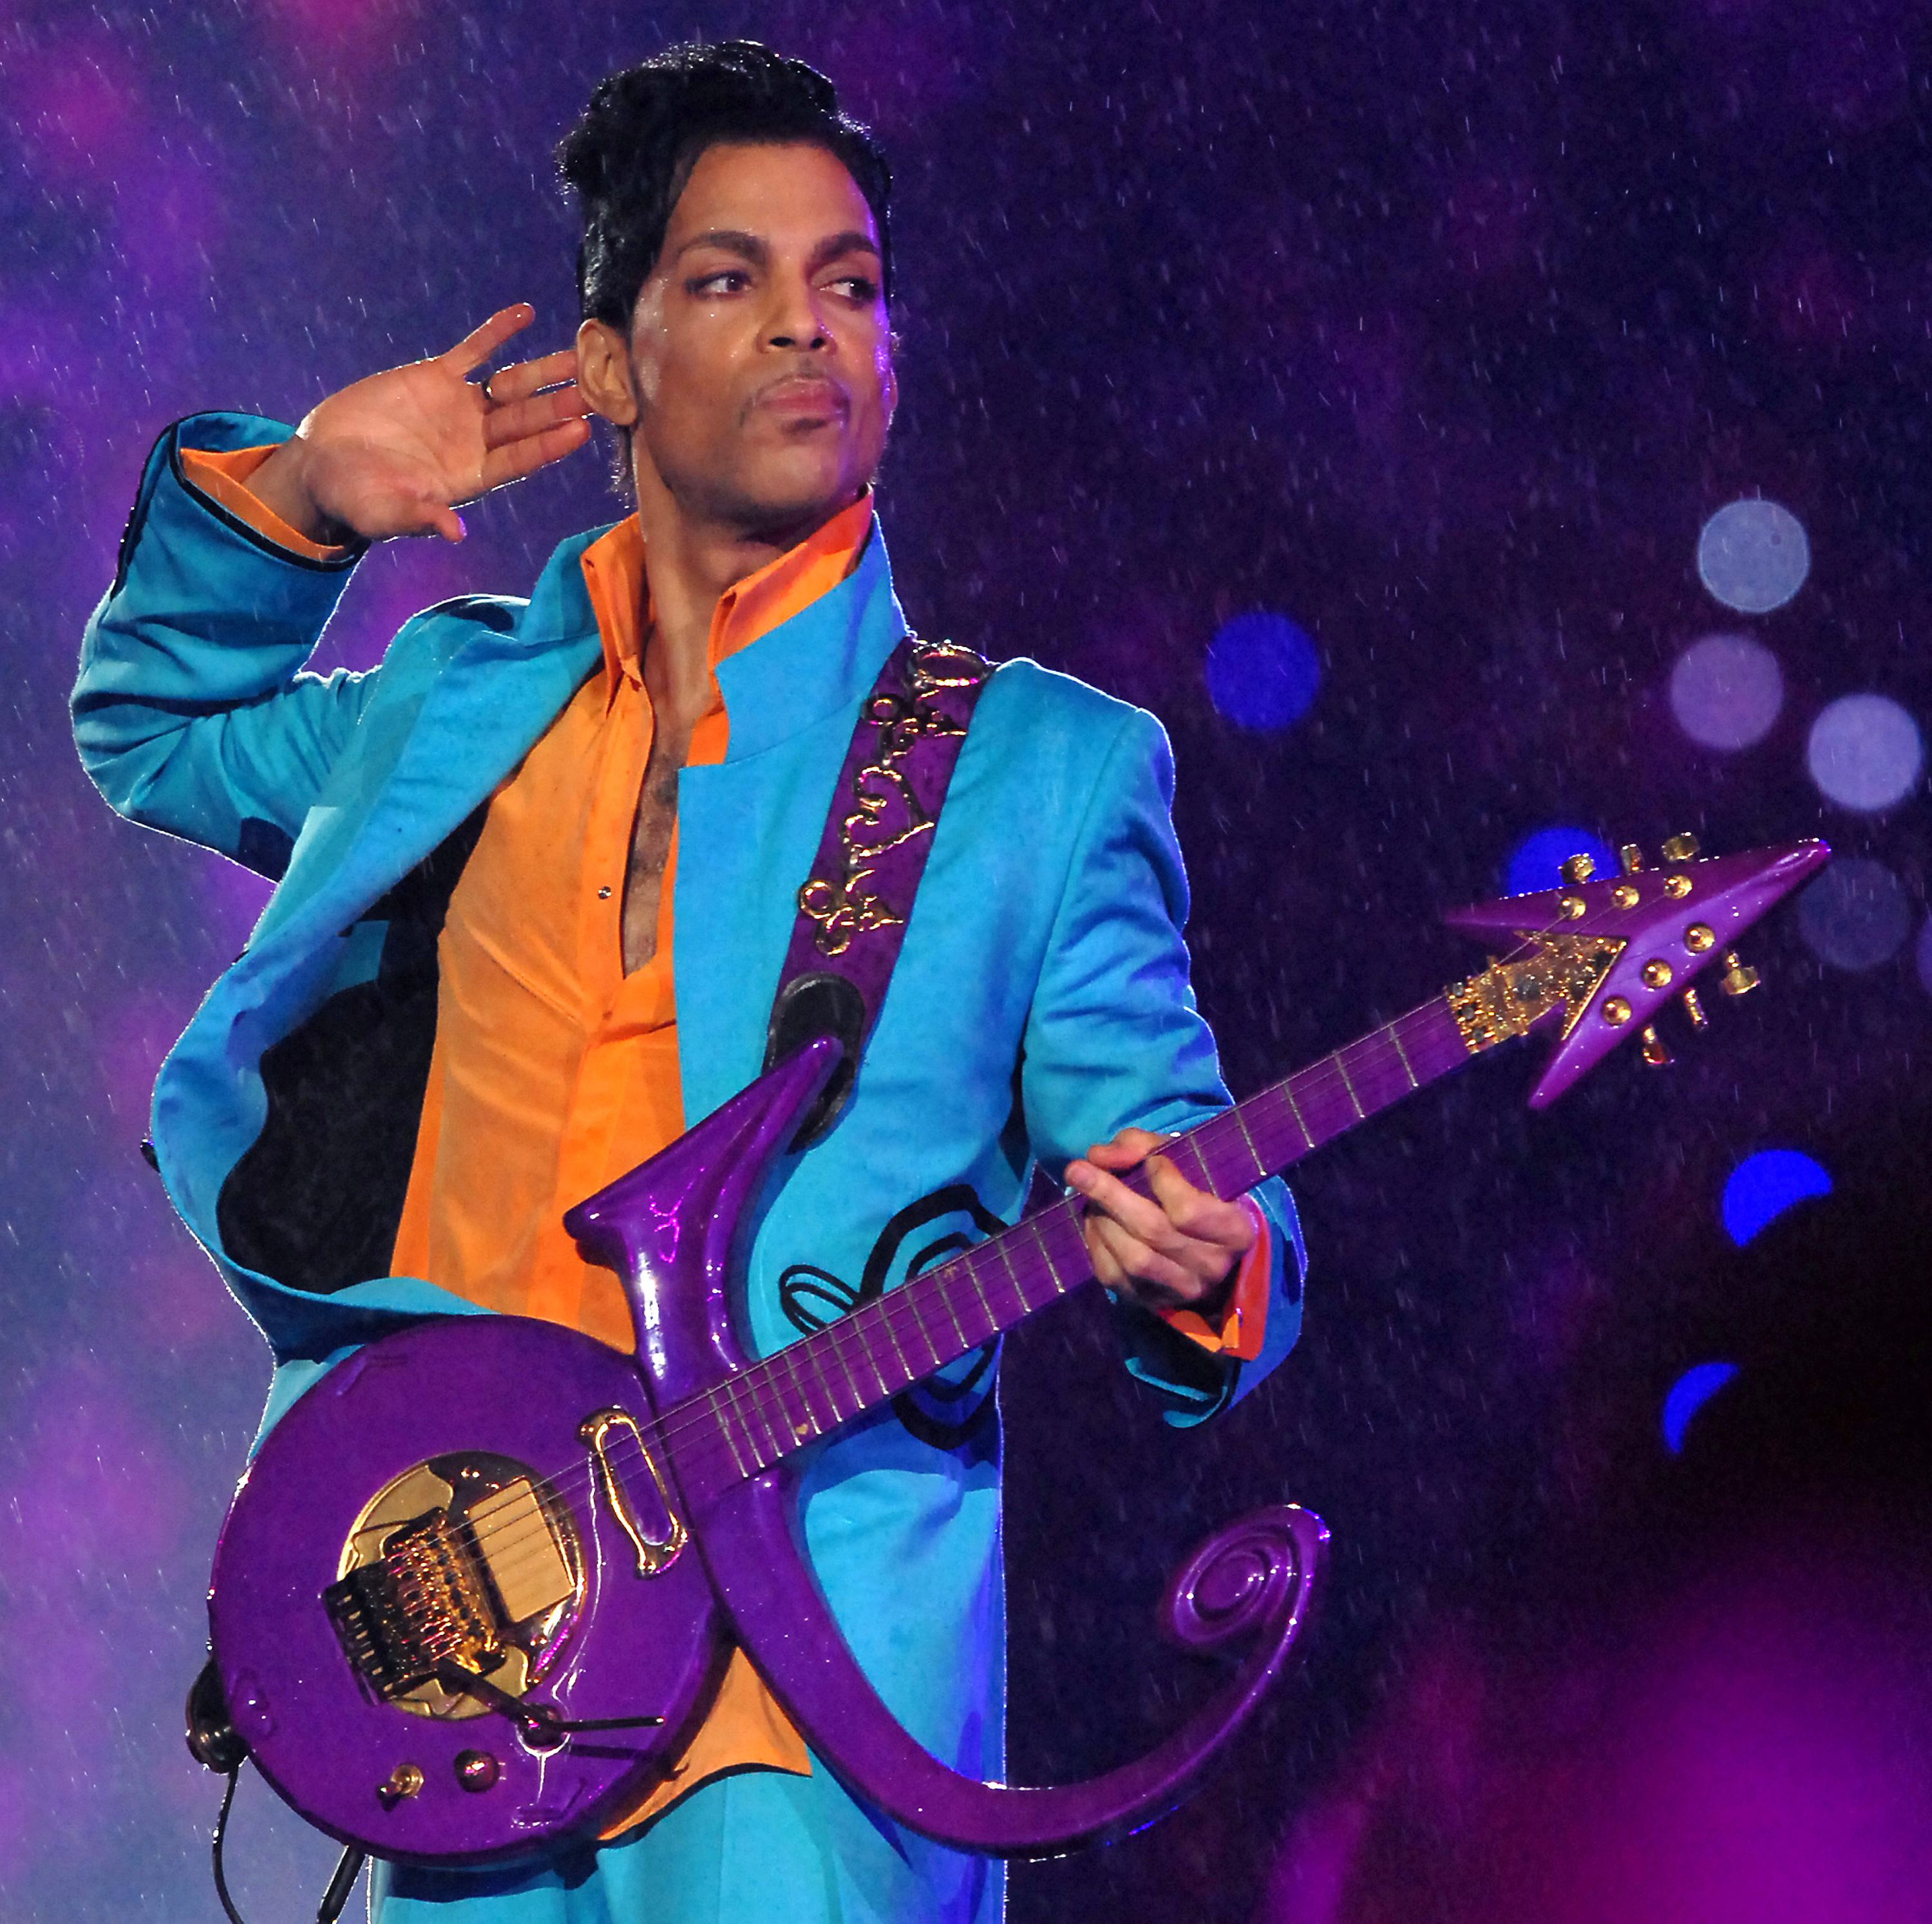 Prince performing at half time during Super Bowl XLI on February 4, 2007 in Miami, Florida | Source: Getty Images